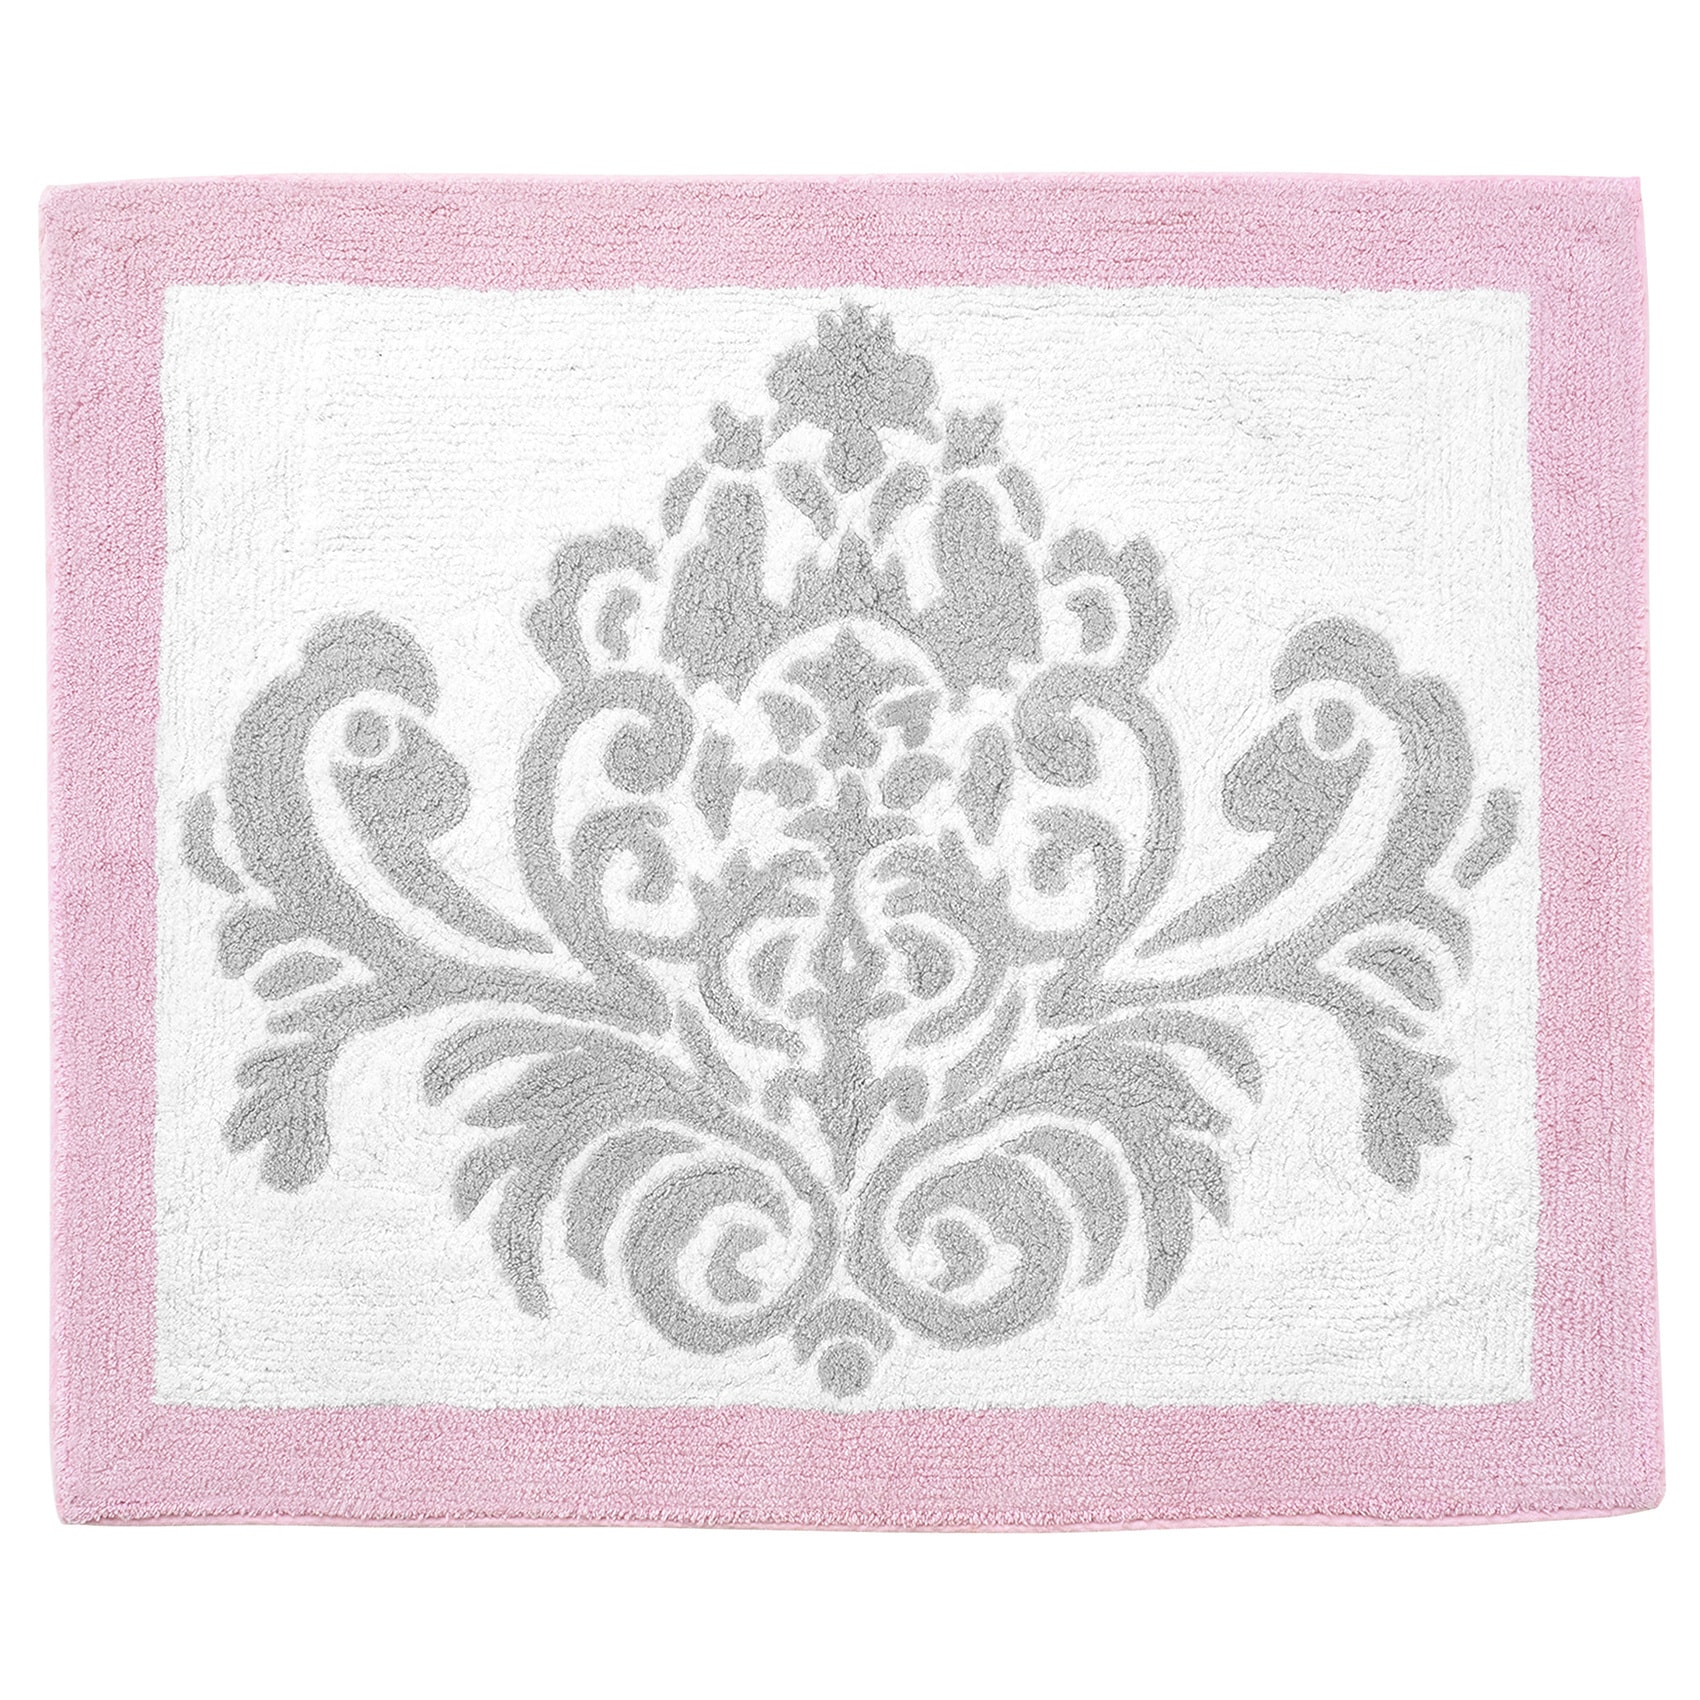 Sweet Jojo Designs Elizabeth Damask Accent Floor Rug In Elizabeth (Grey/ pink/ whiteImportedThe digital images we display have the most accurate color possible. However, due to differences in computer monitors, we cannot be responsible for variations in c